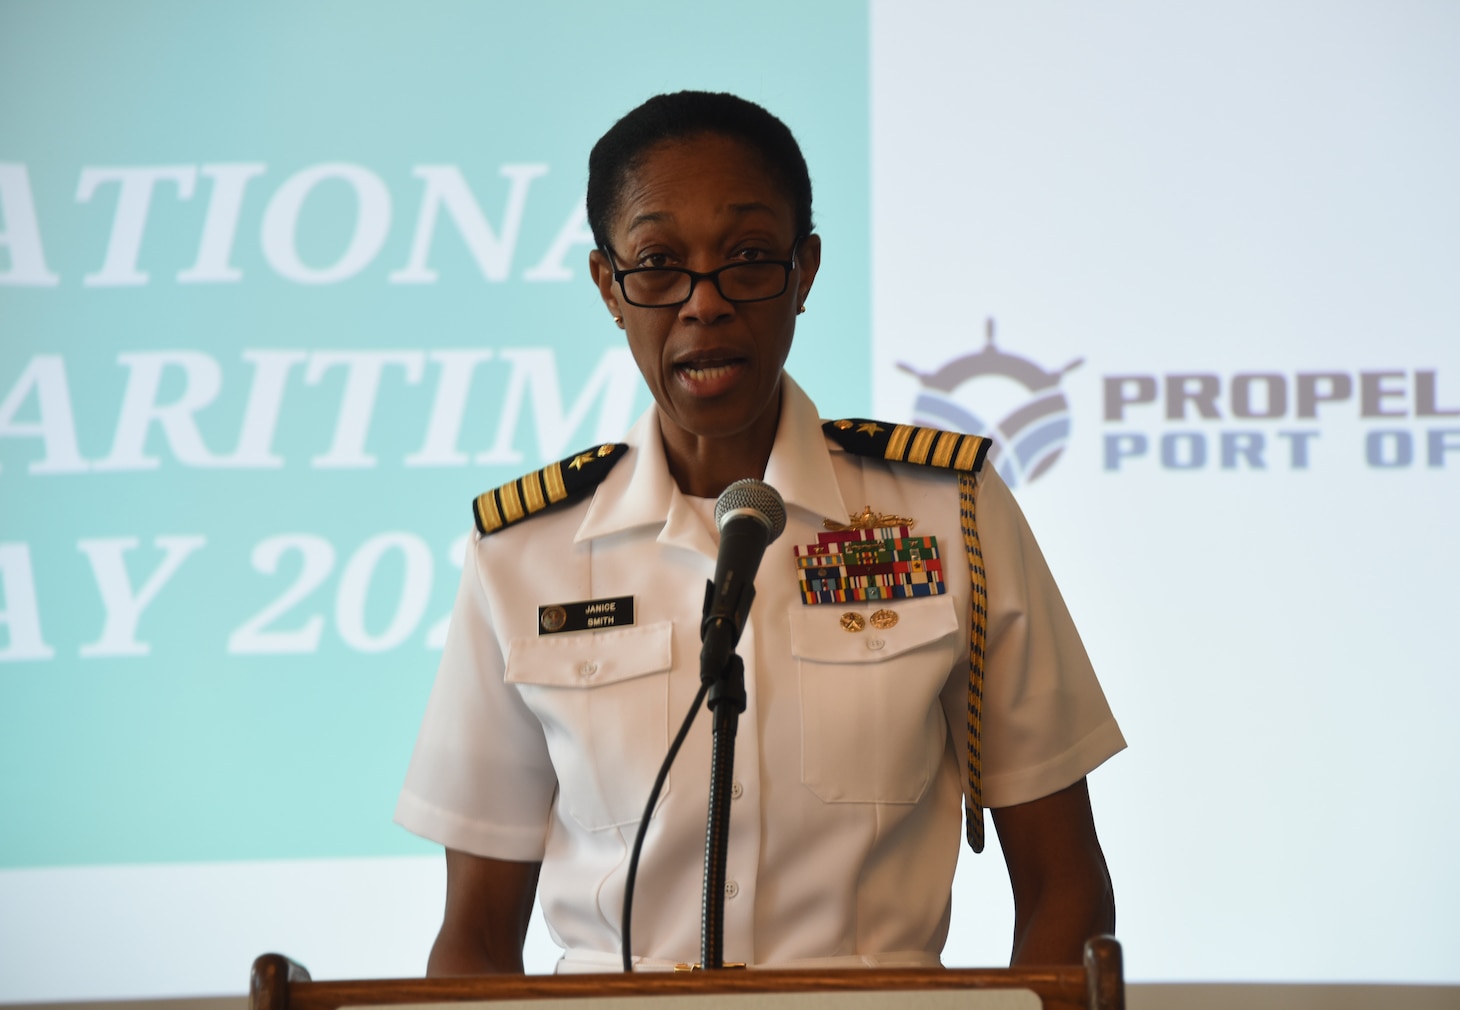 Military Sealift Command Chief of Staff Capt. Janis C. Smith, address attendees at a celebration held in honor of National Maritime Day, May 19.